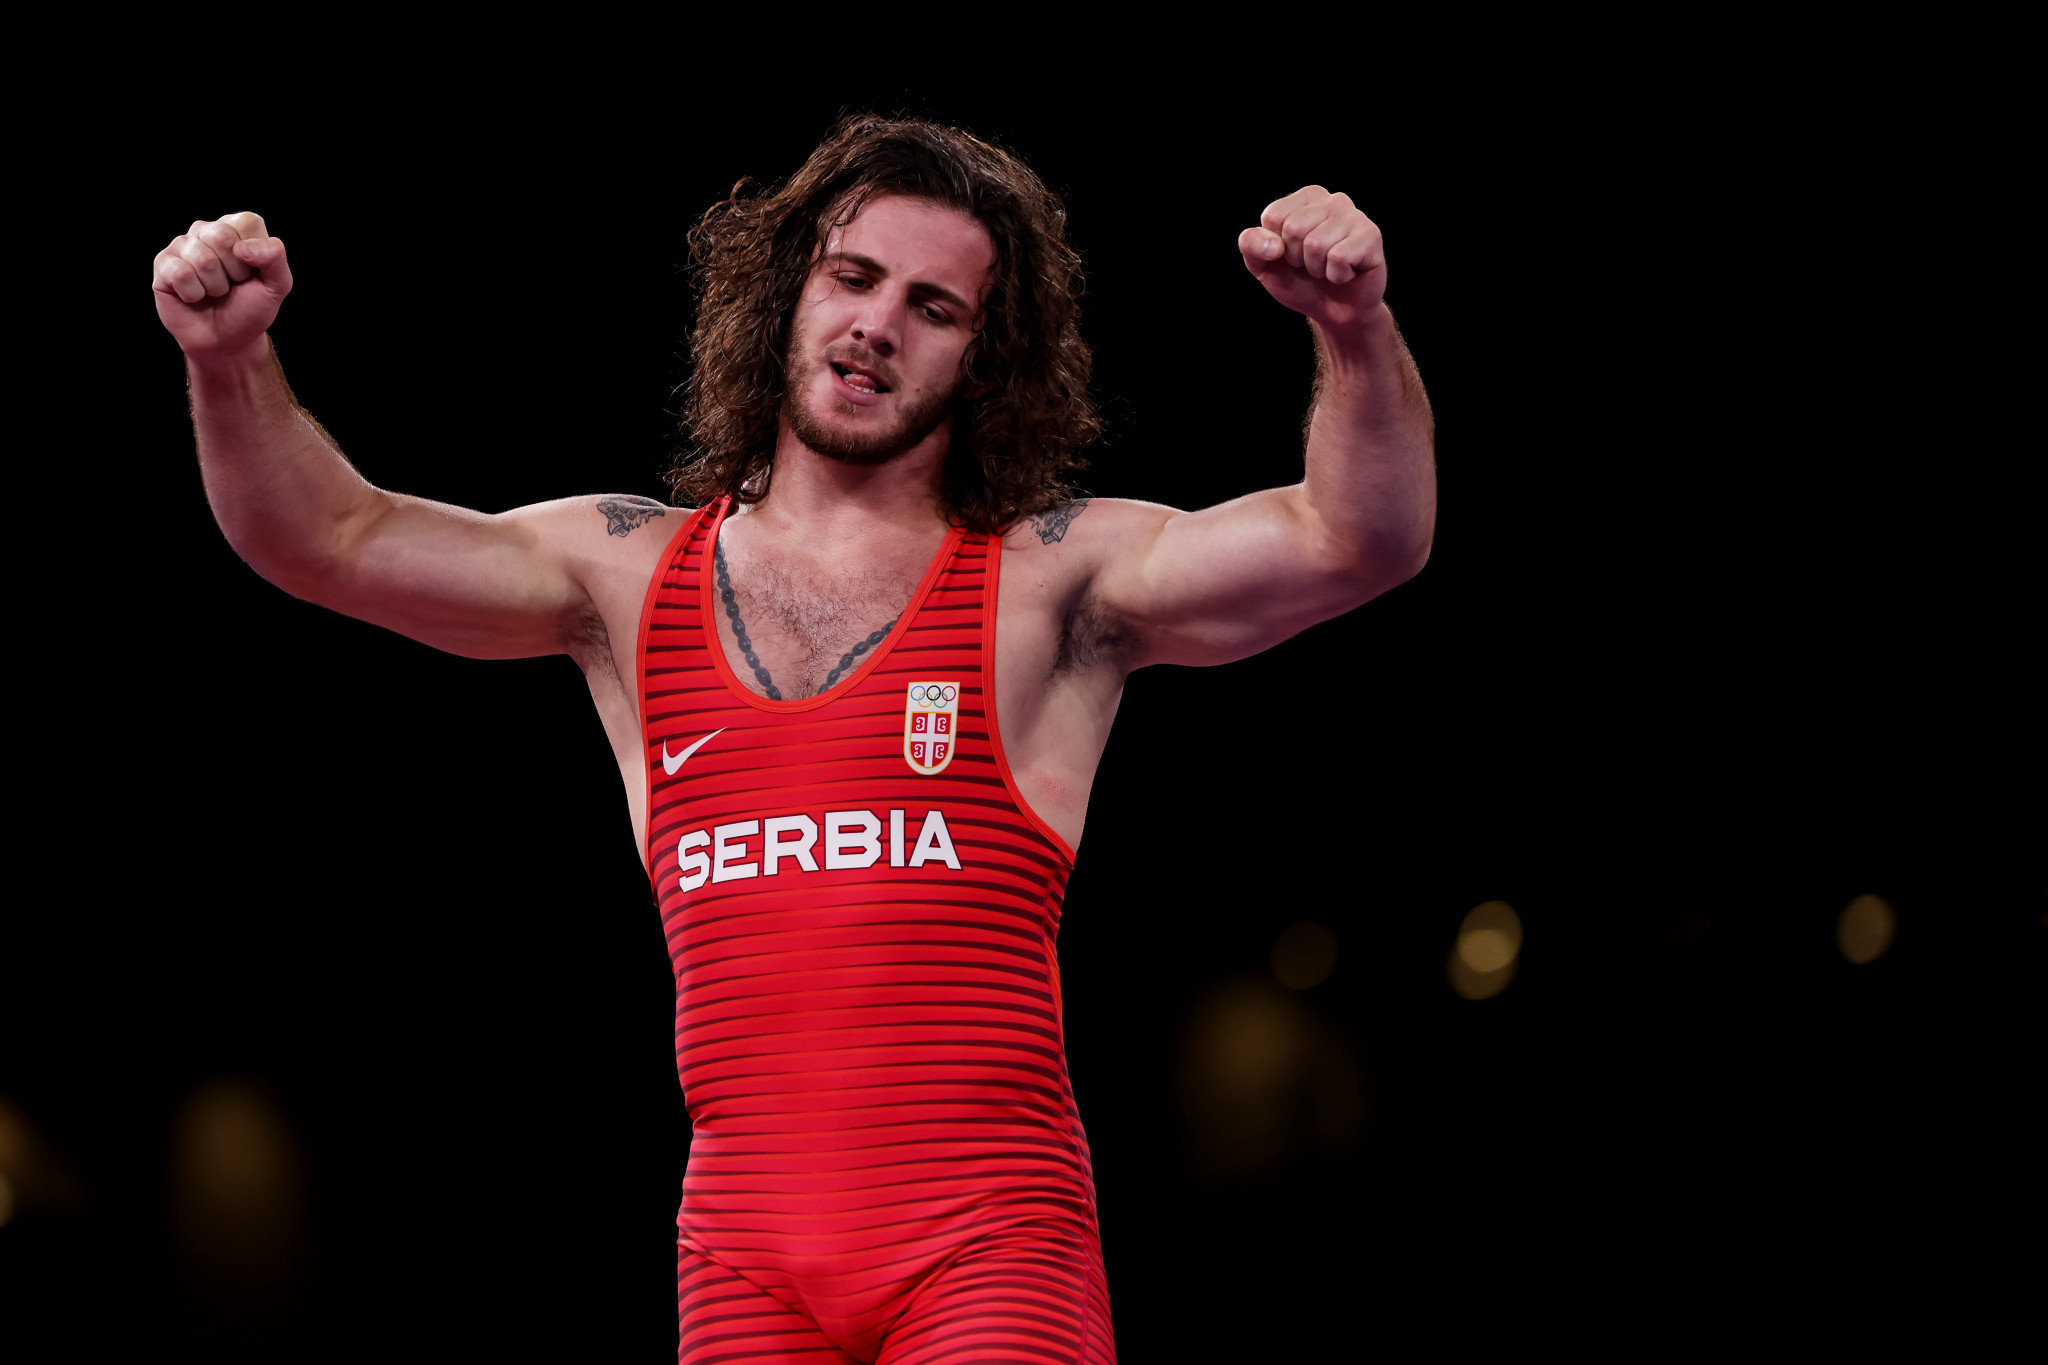 Hosts Serbia take two golds on opening day of finals at World Wrestling Championships